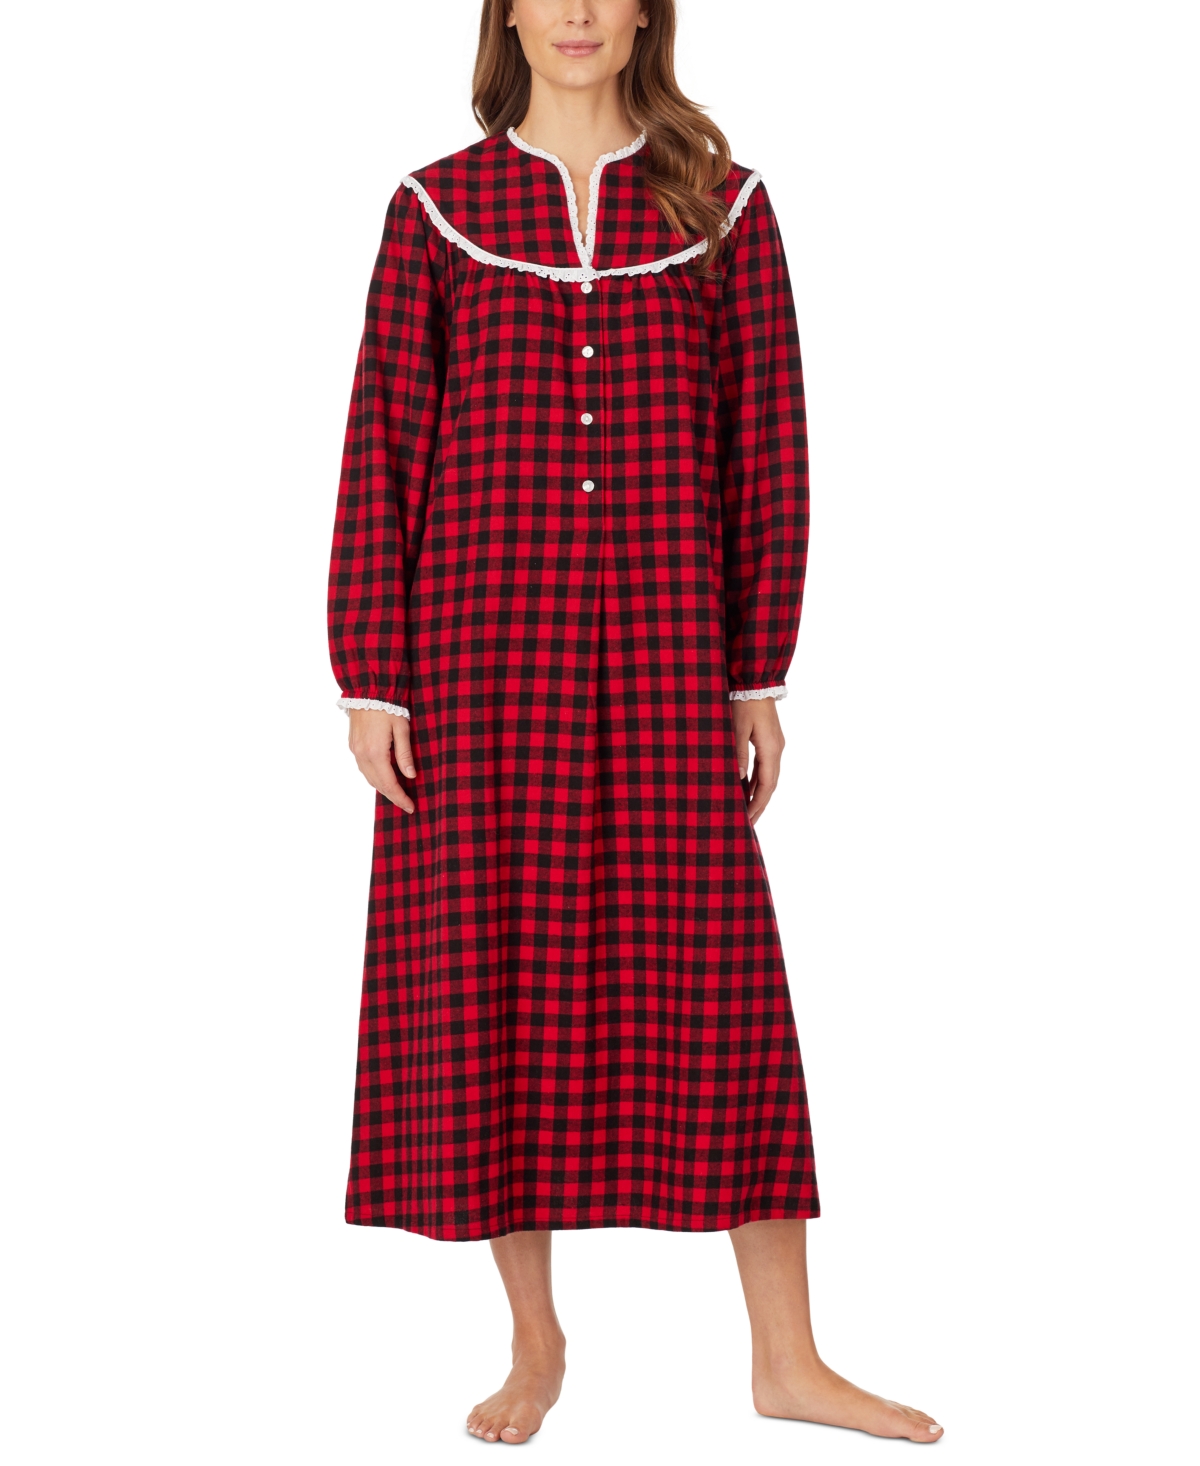 Cotton Lace-Trim Flannel Nightgown - Red Plaid